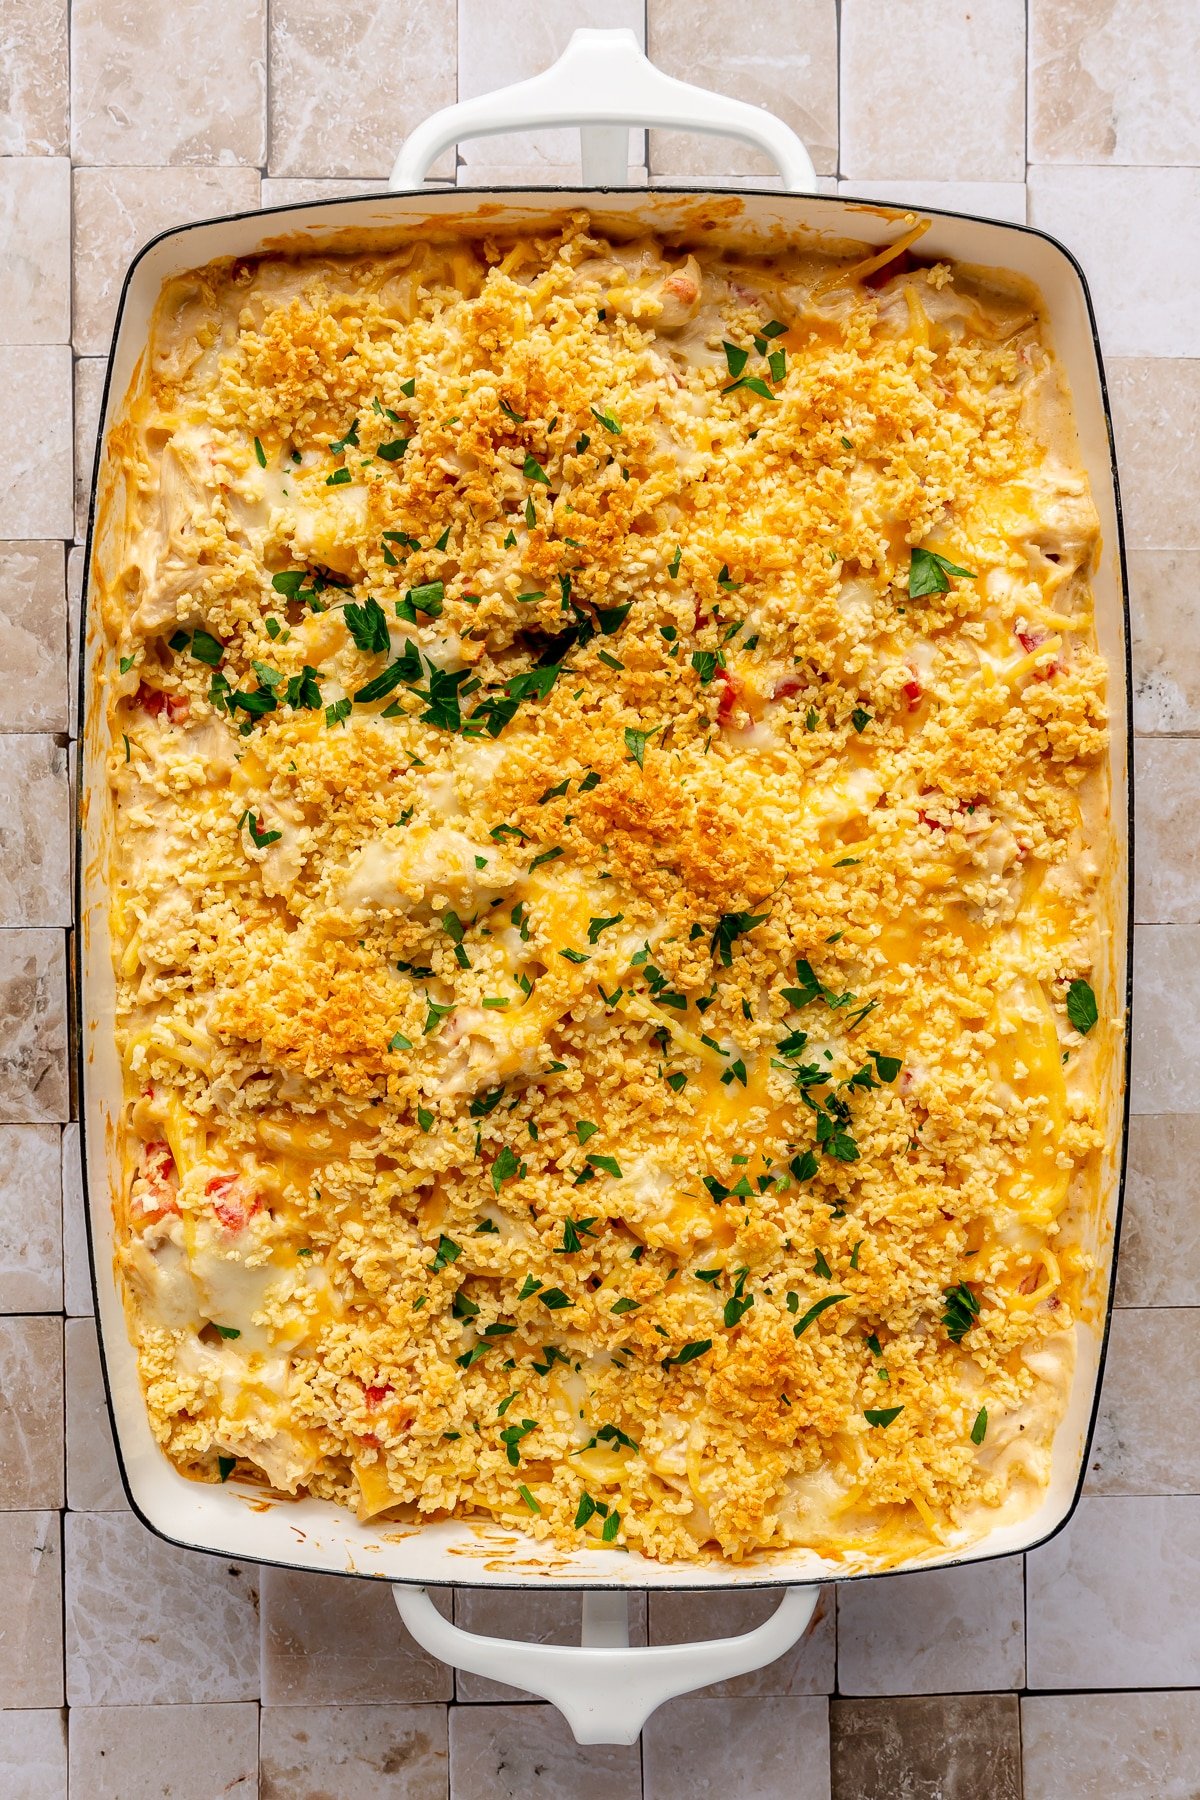 The chicken mixture, topped with breadcrumbs, has been fully baked to a golden brown and topped with chopped parsley.